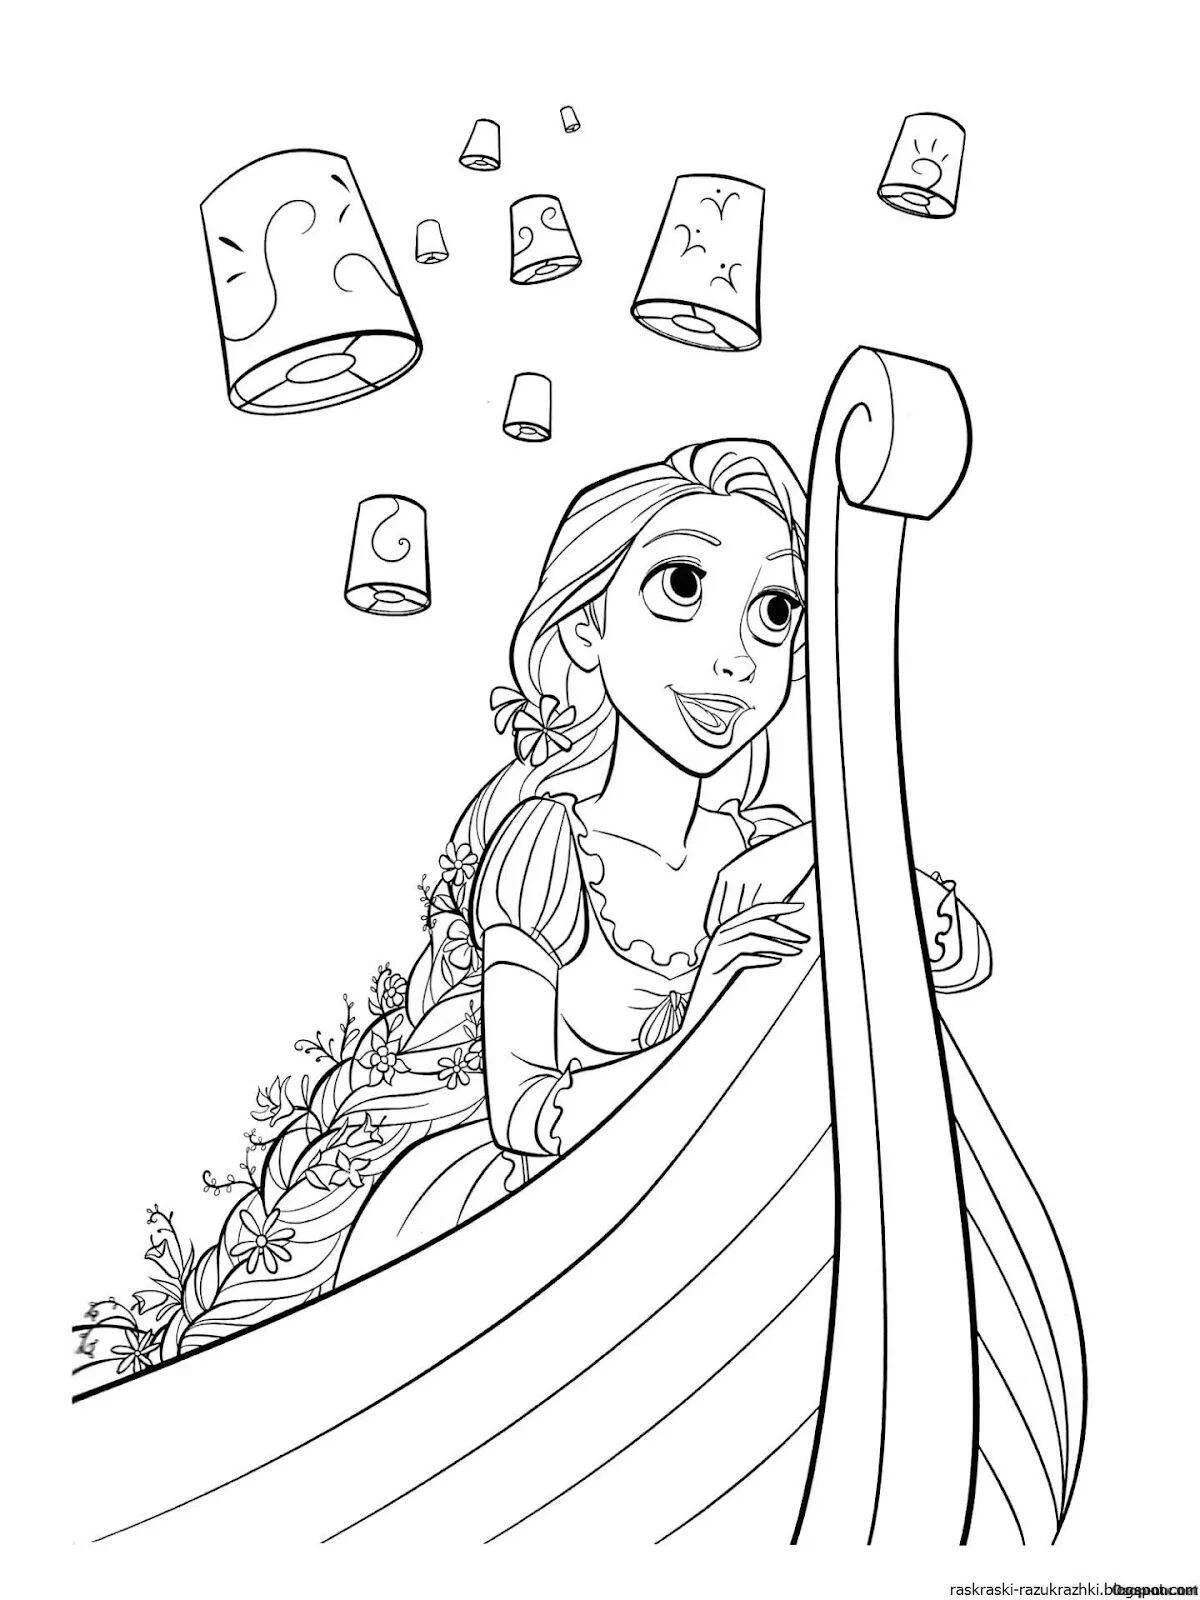 Exotic rapunzel coloring book for kids 5-6 years old